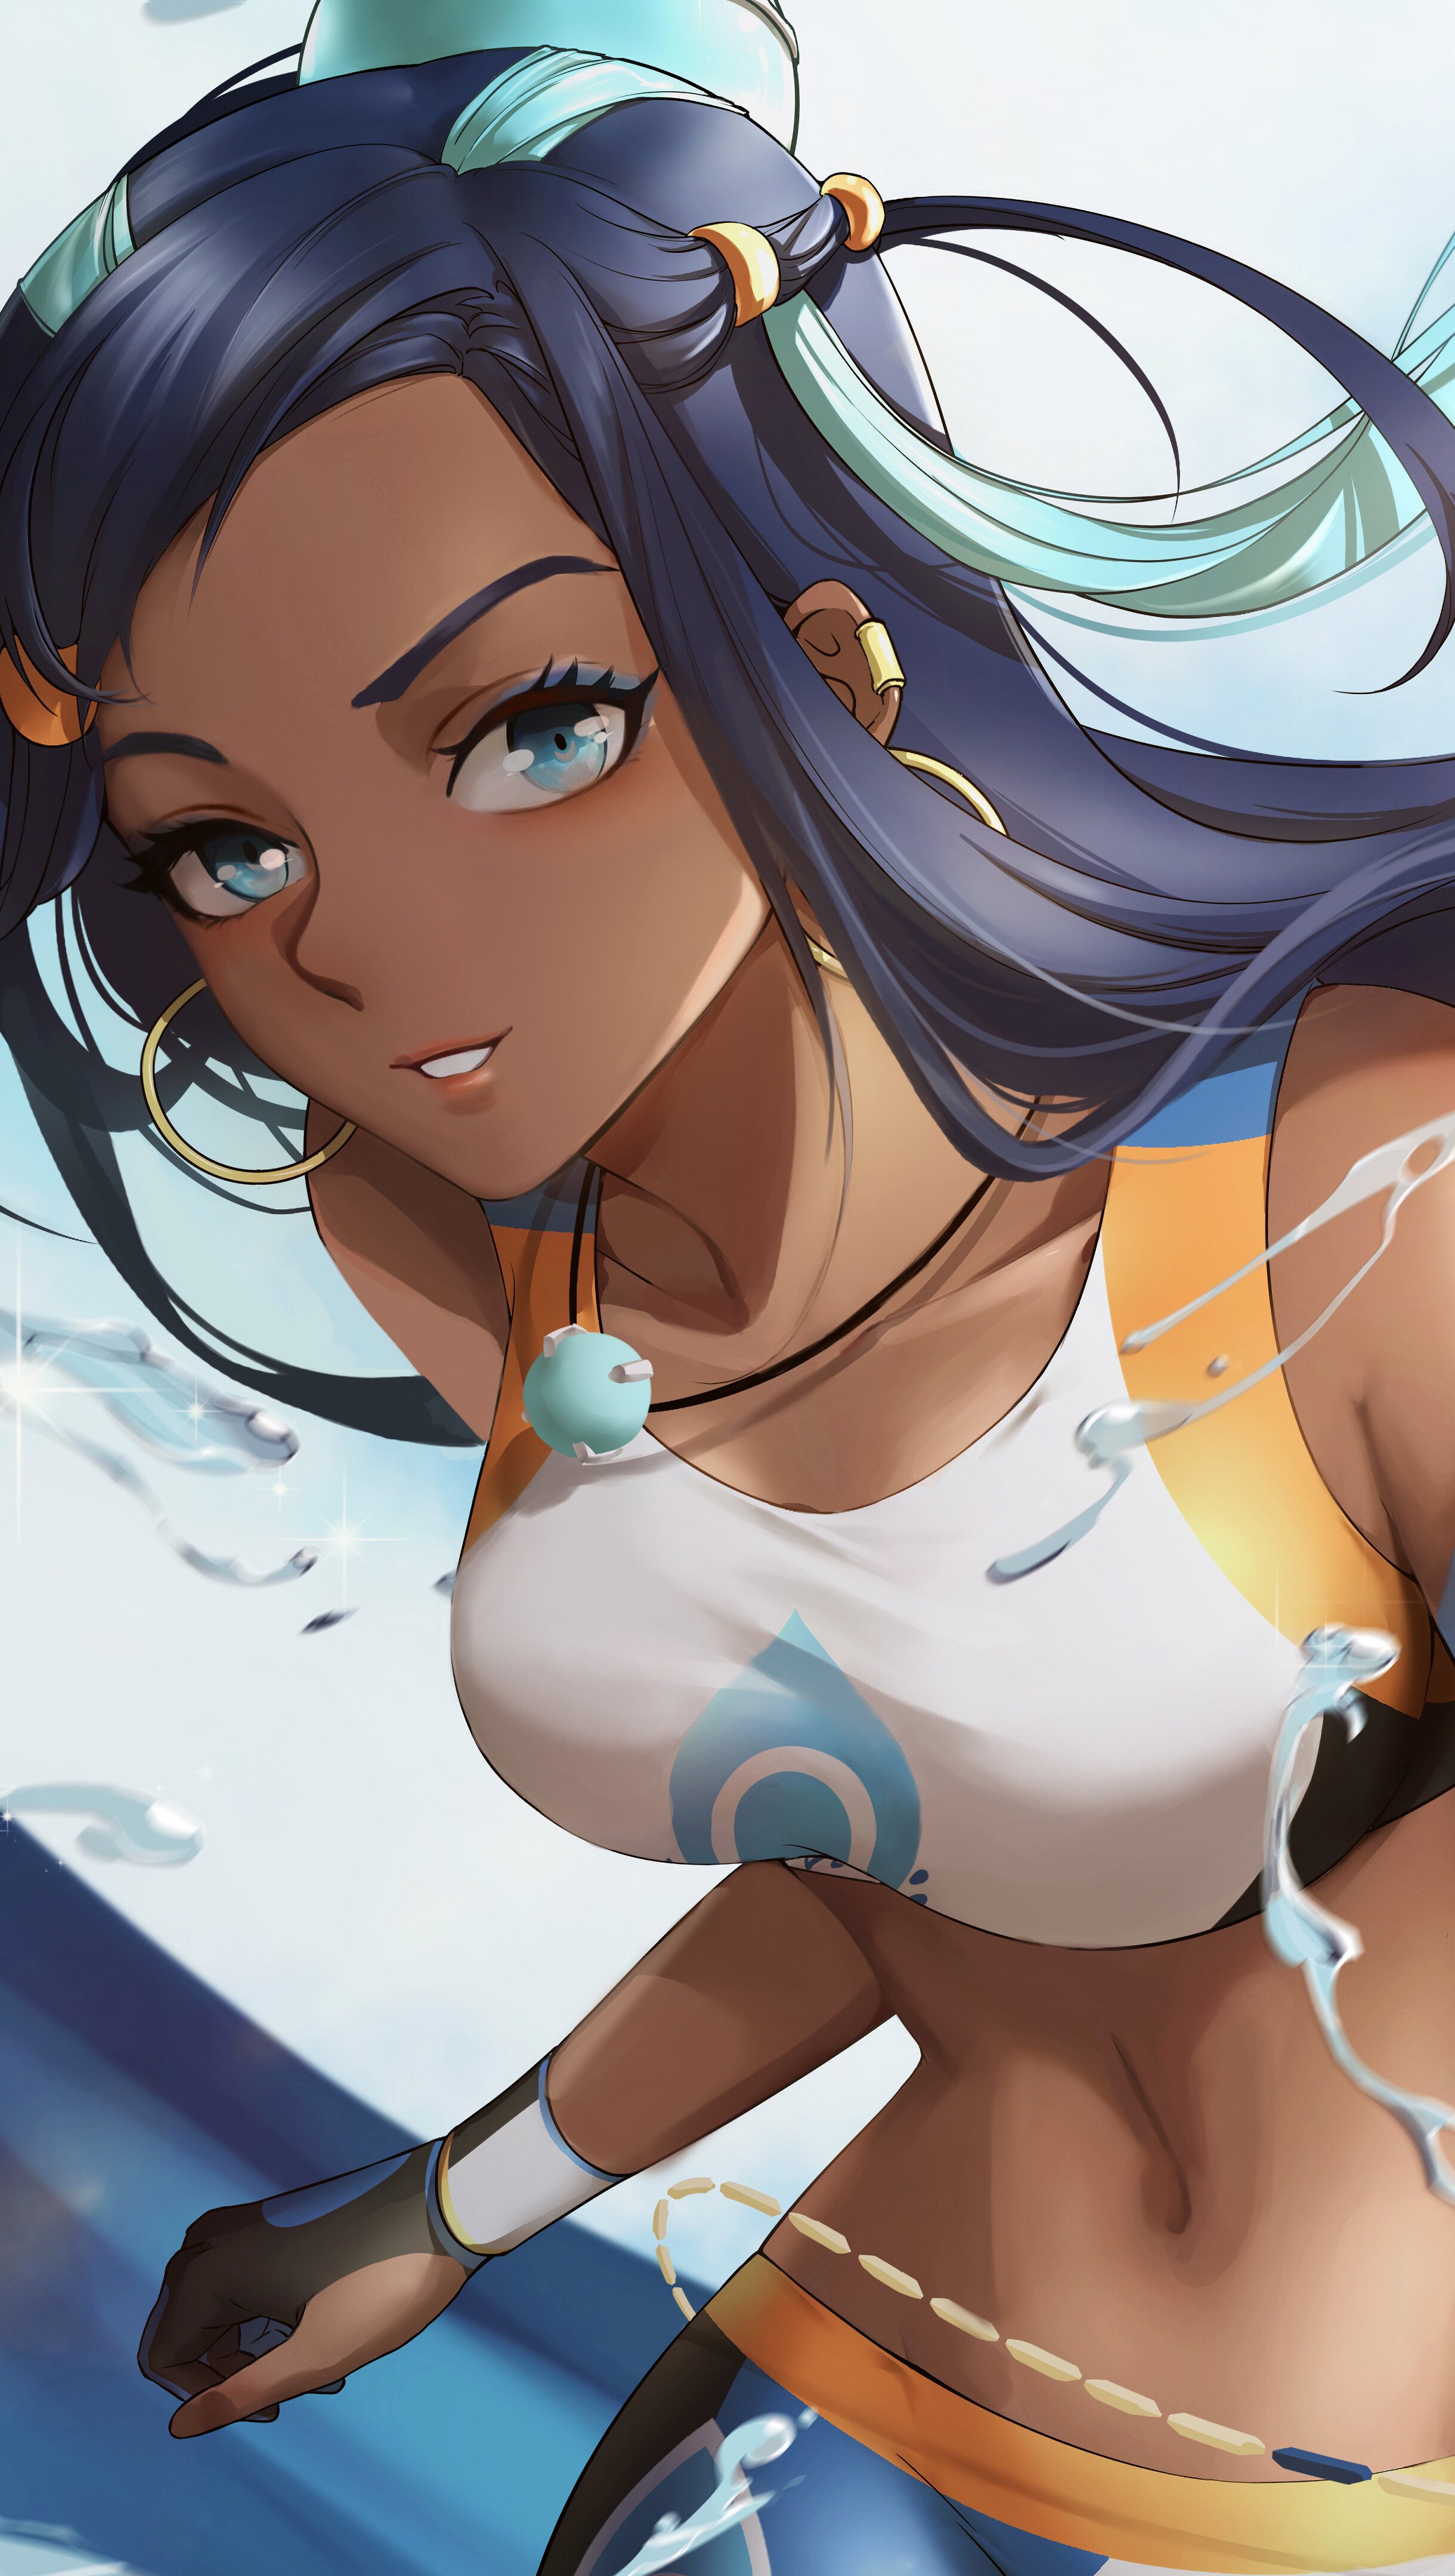 Anime Wallpaper Nessa with pokeball from Pokemon sword and shield Vertical